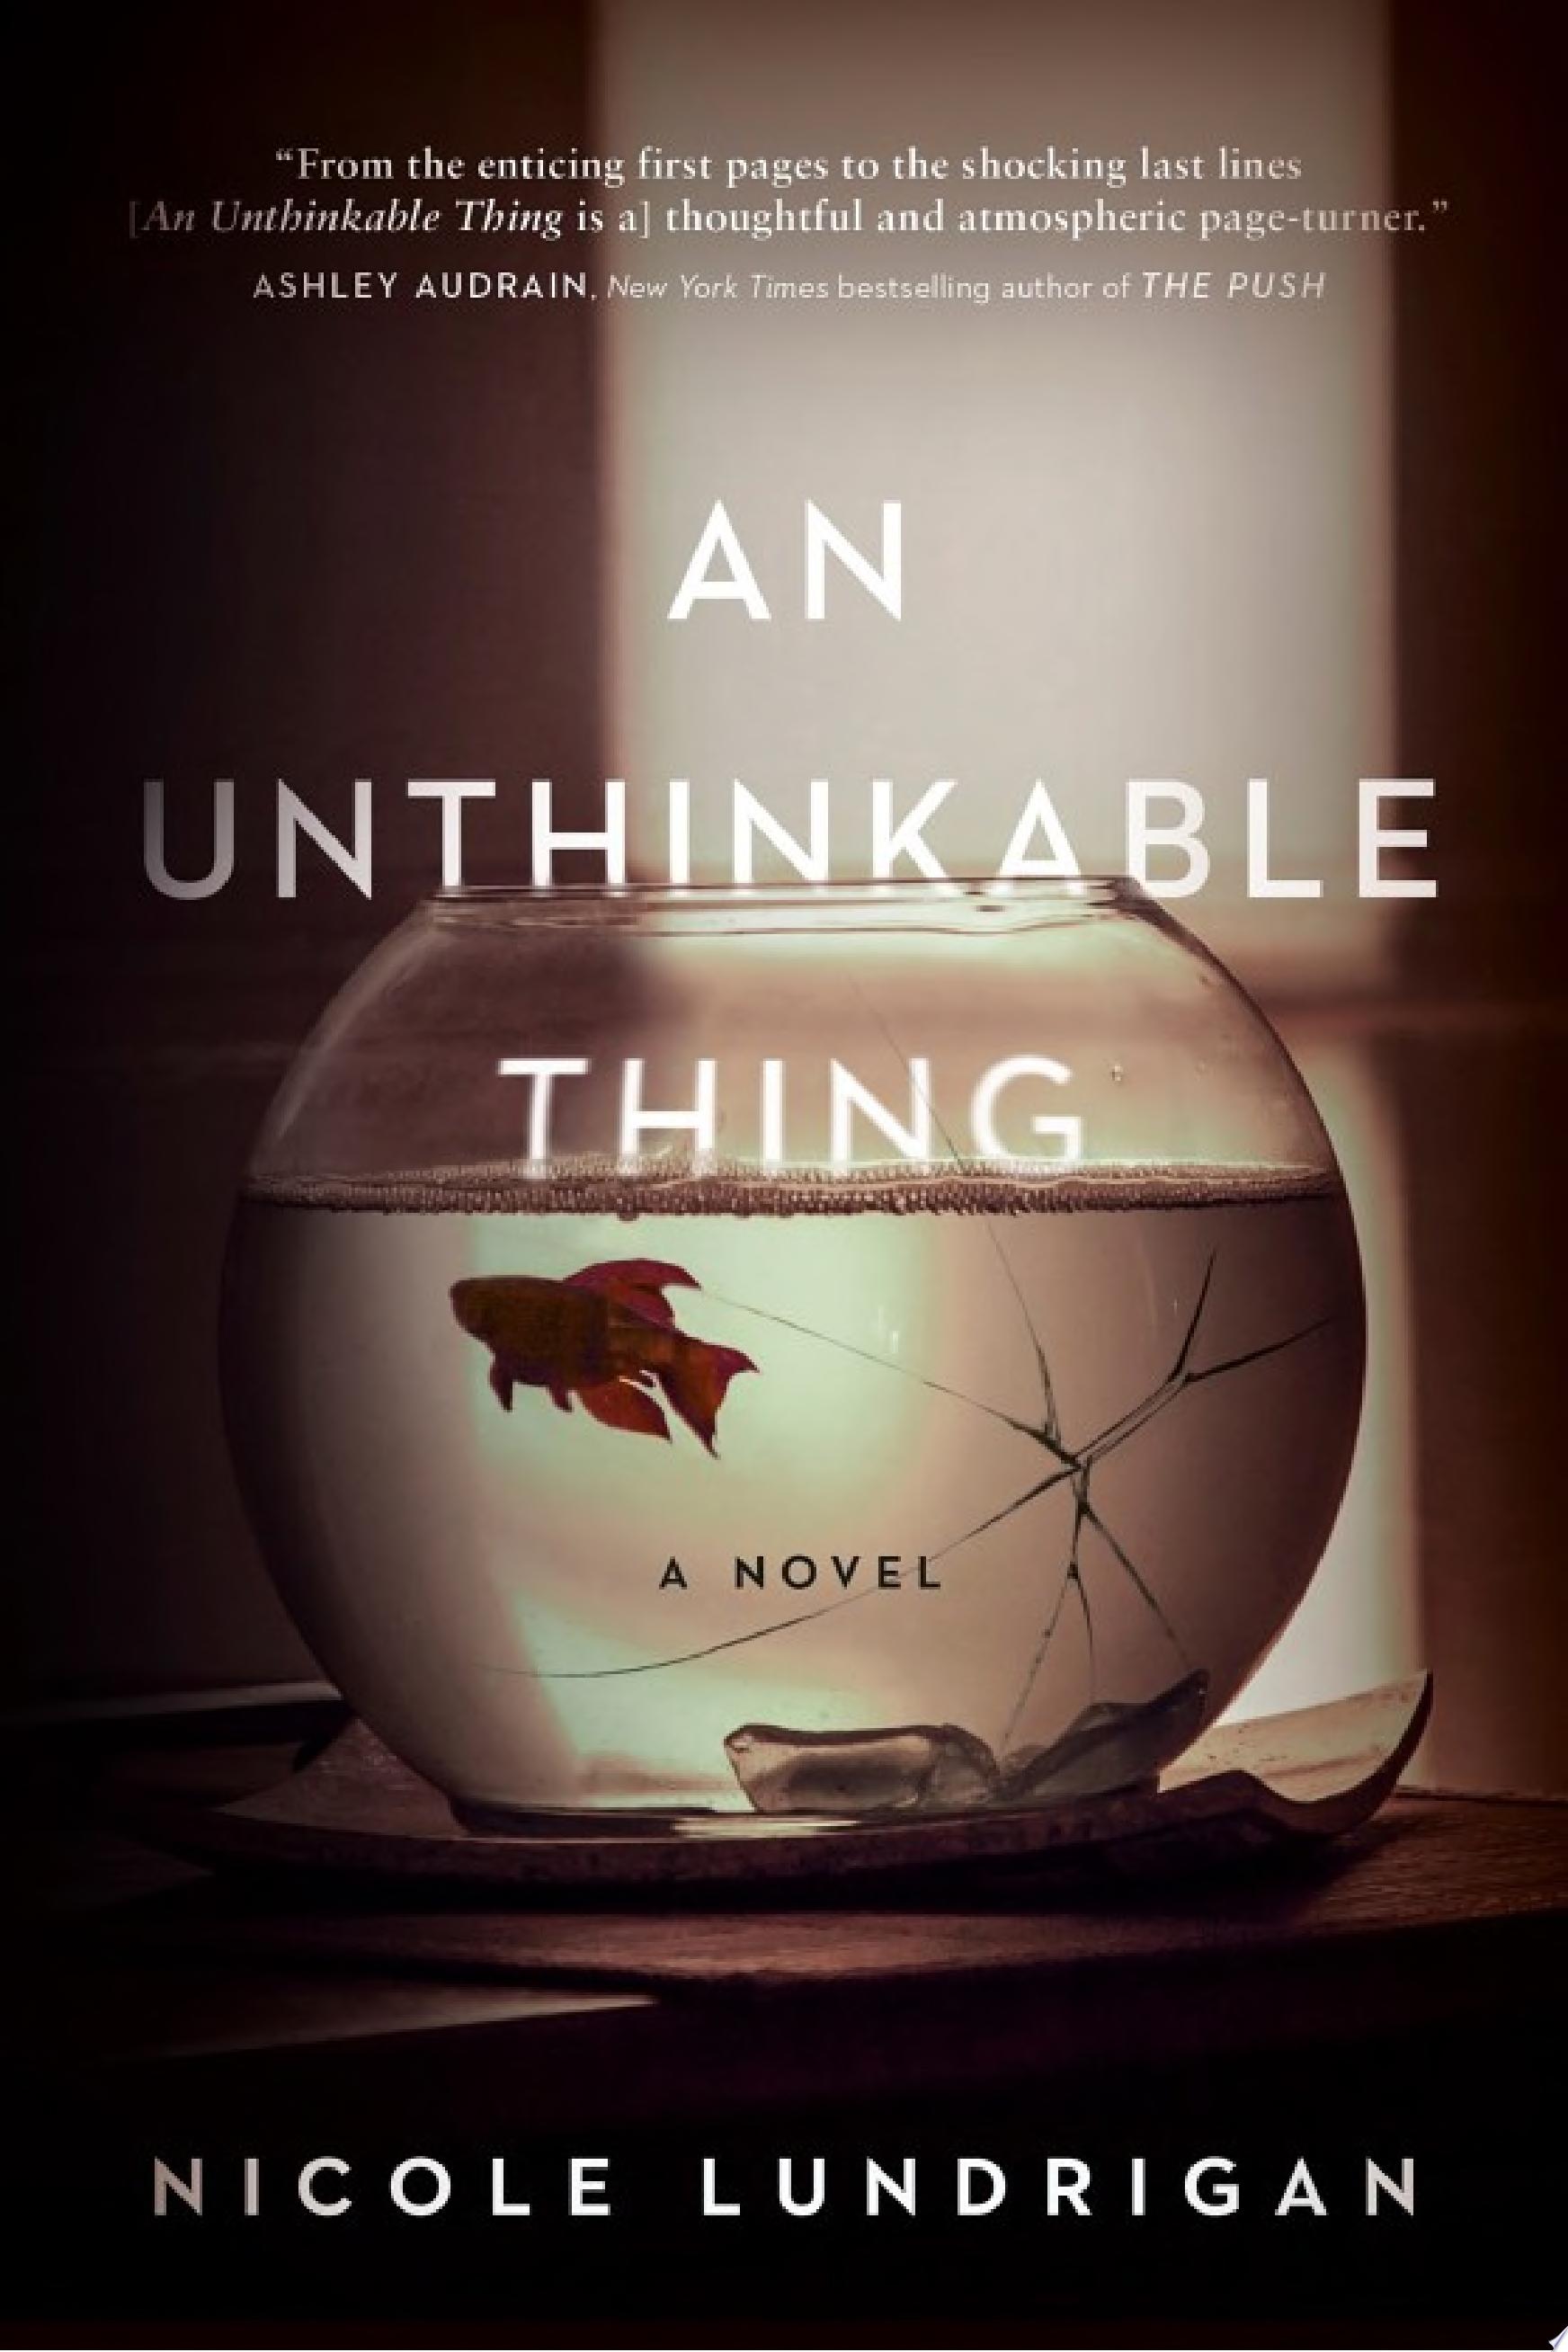 Image for "An Unthinkable Thing"